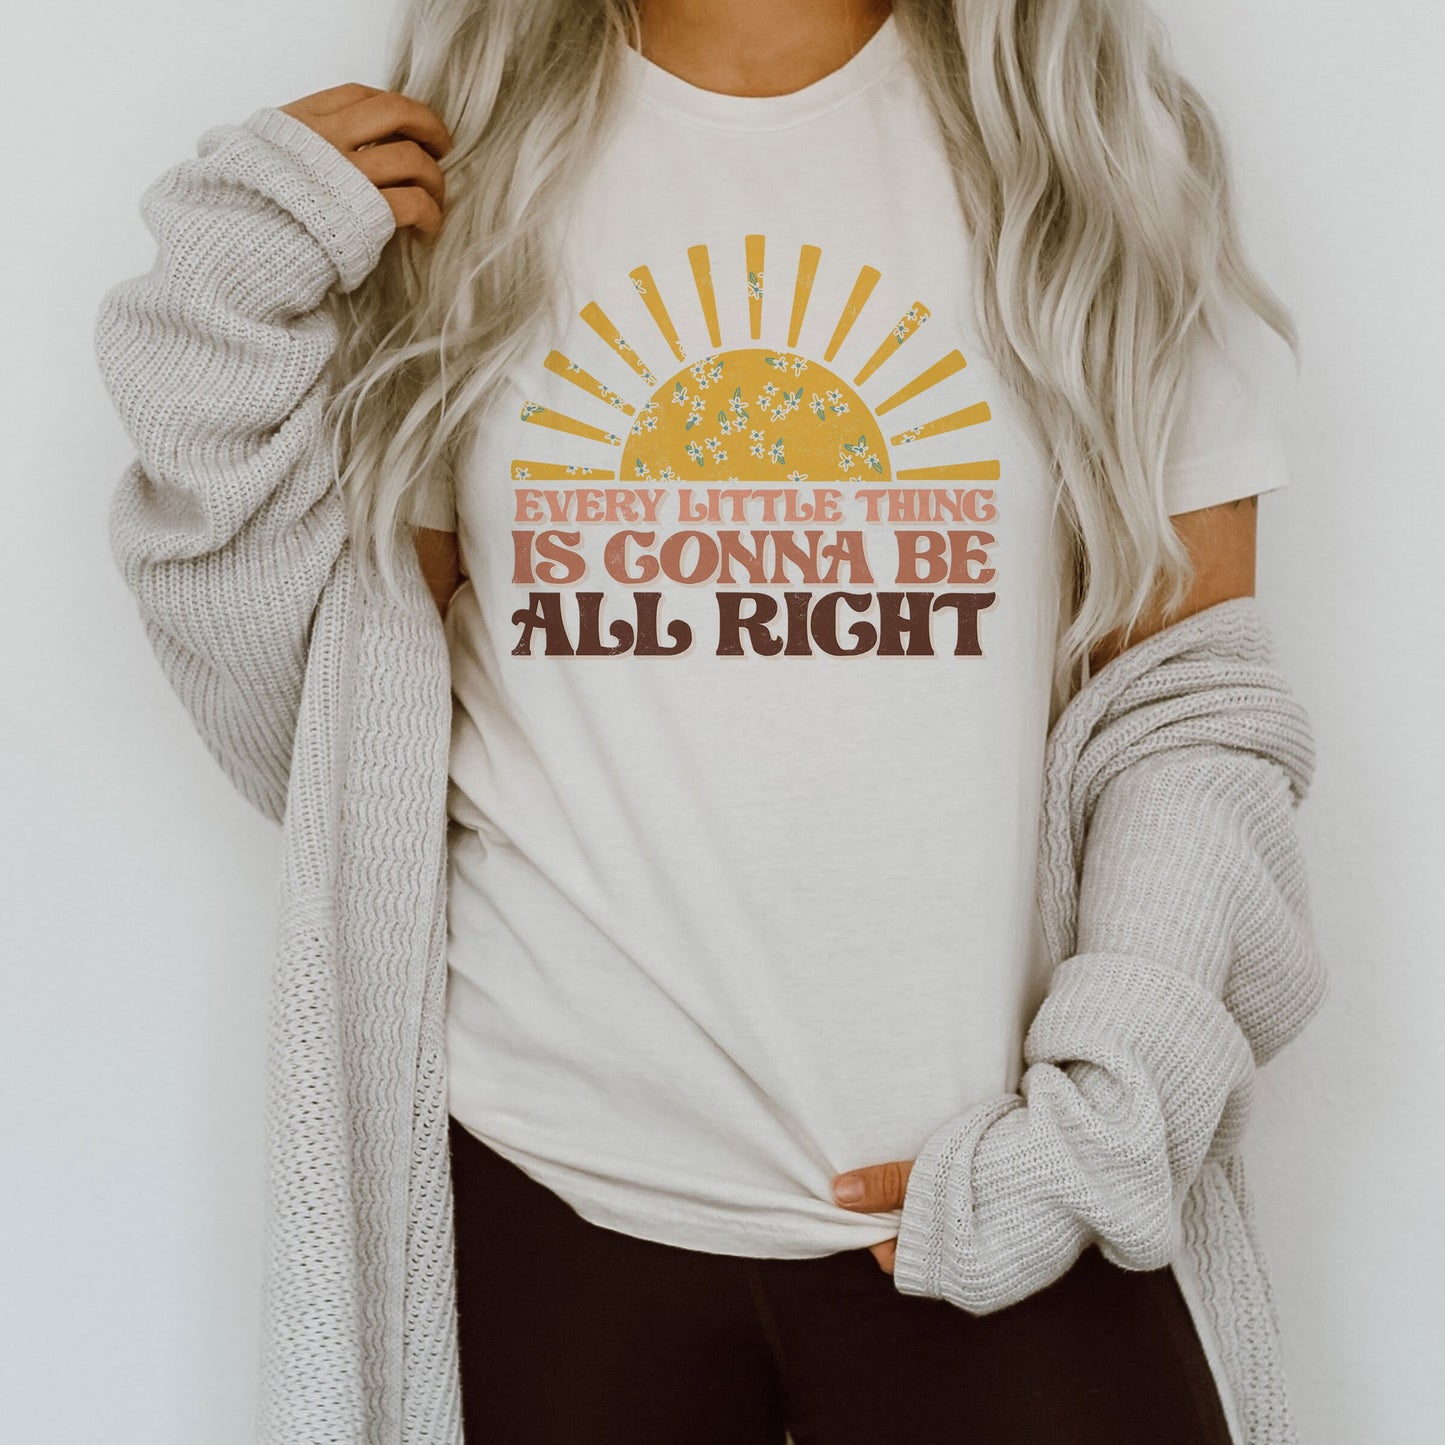 Every Little Thing Gonna Be Alright Sunshine Peaches Ultra Soft Graphic Tee Unisex Soft Tee T-shirt for Women or Men